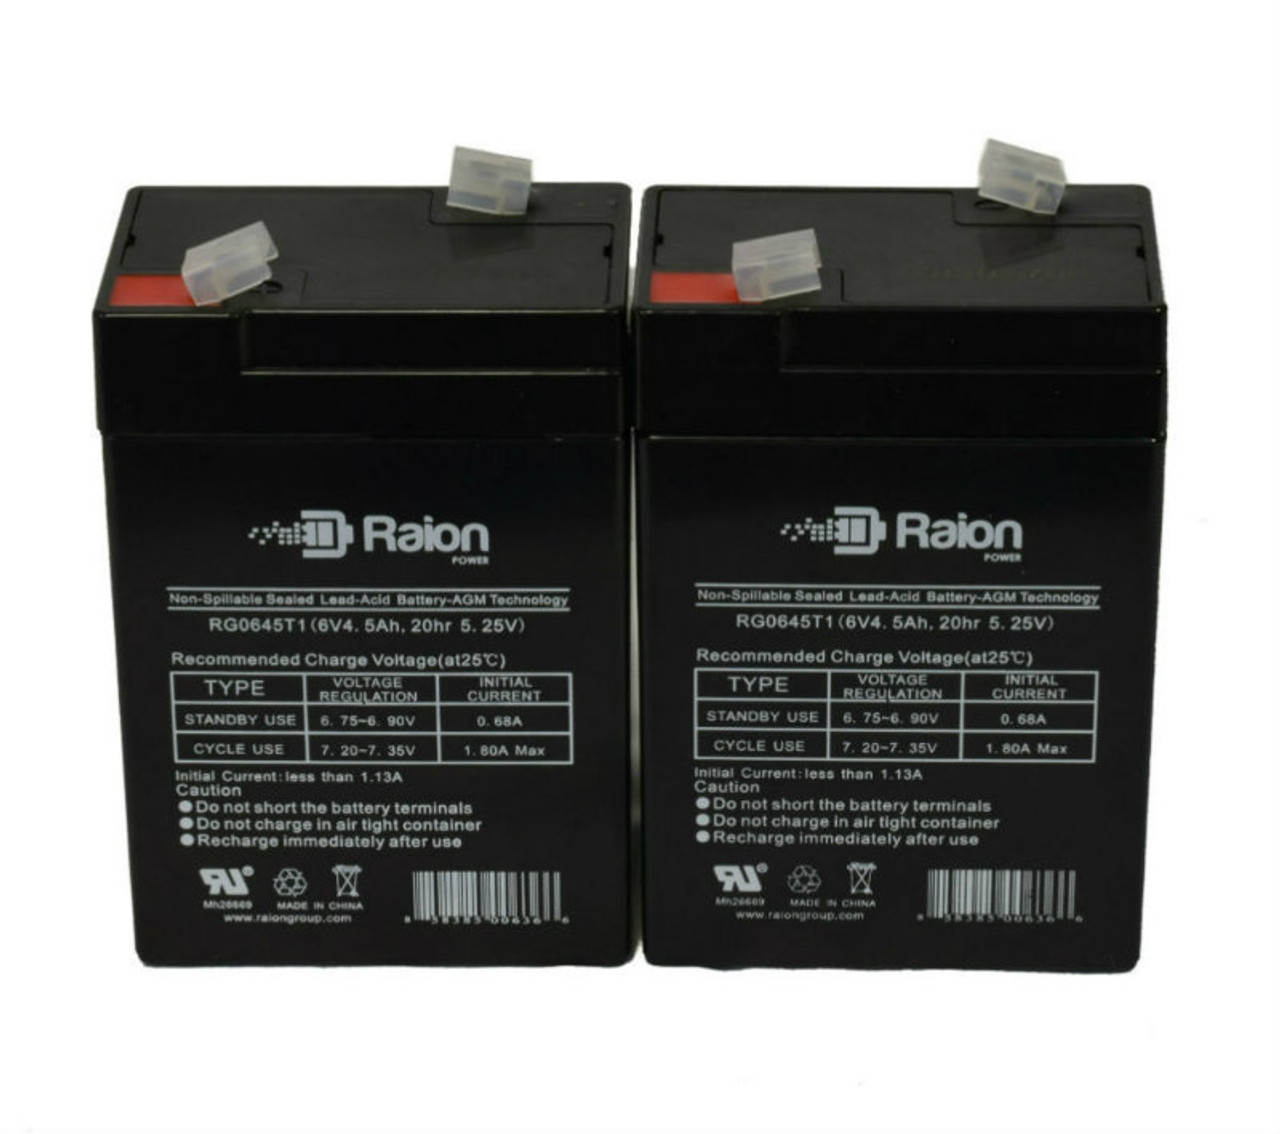 Raion Power 6V 4.5Ah Replacement Emergency Light Battery for Dual-Lite 12-361 / 12361 / 0120361 - 2 Pack